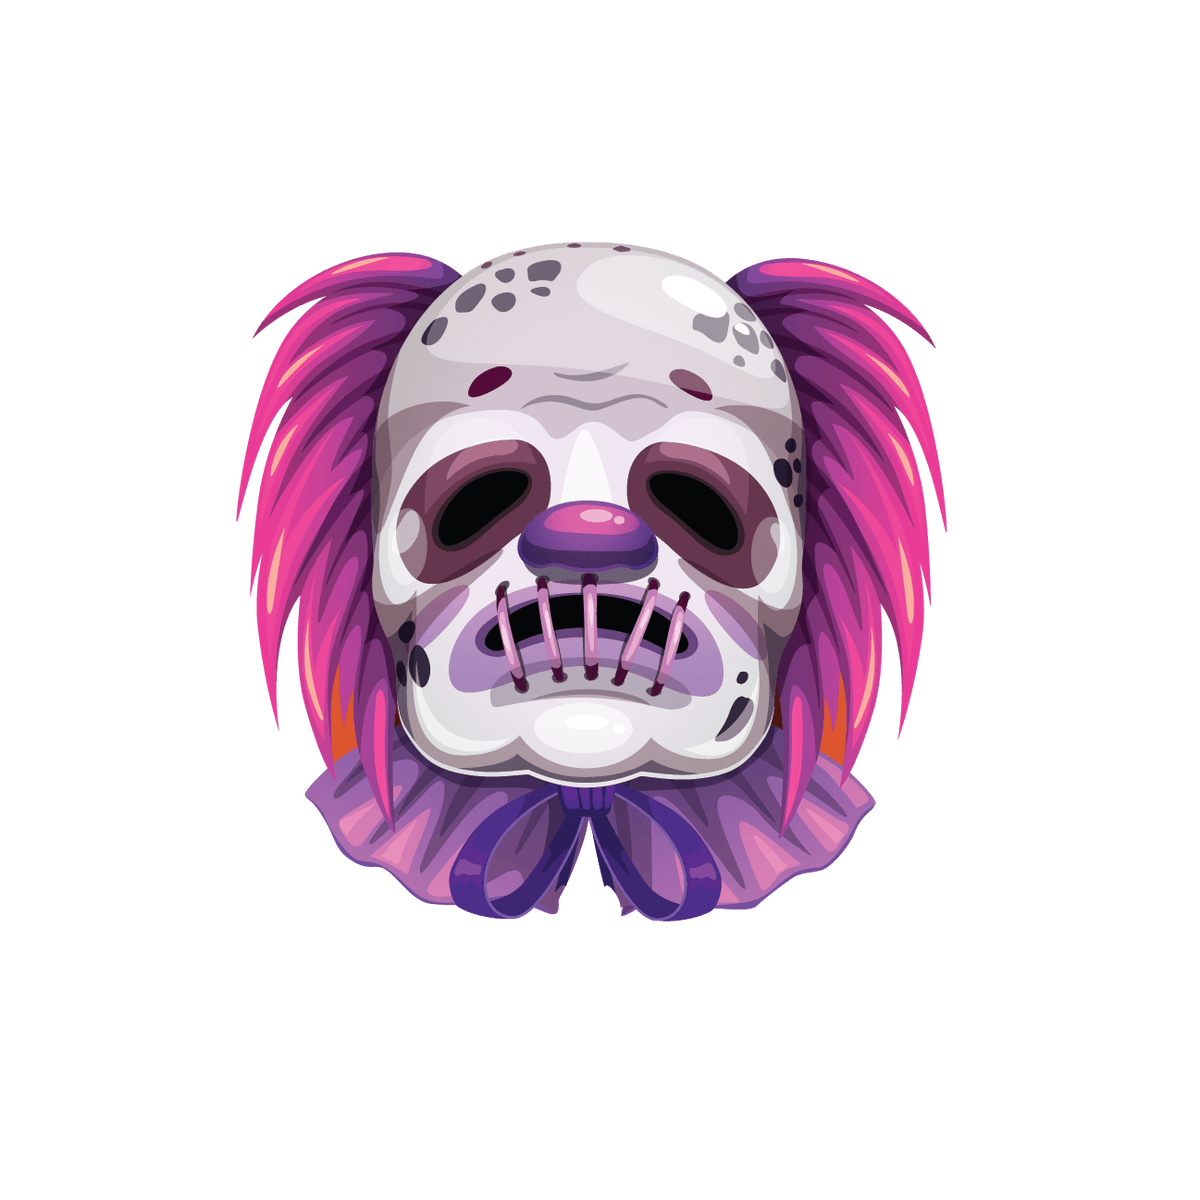 Illustration of a stylized skull with purple and pink hair and details, set against a plain green background in the Cover-Alls penitentiary.